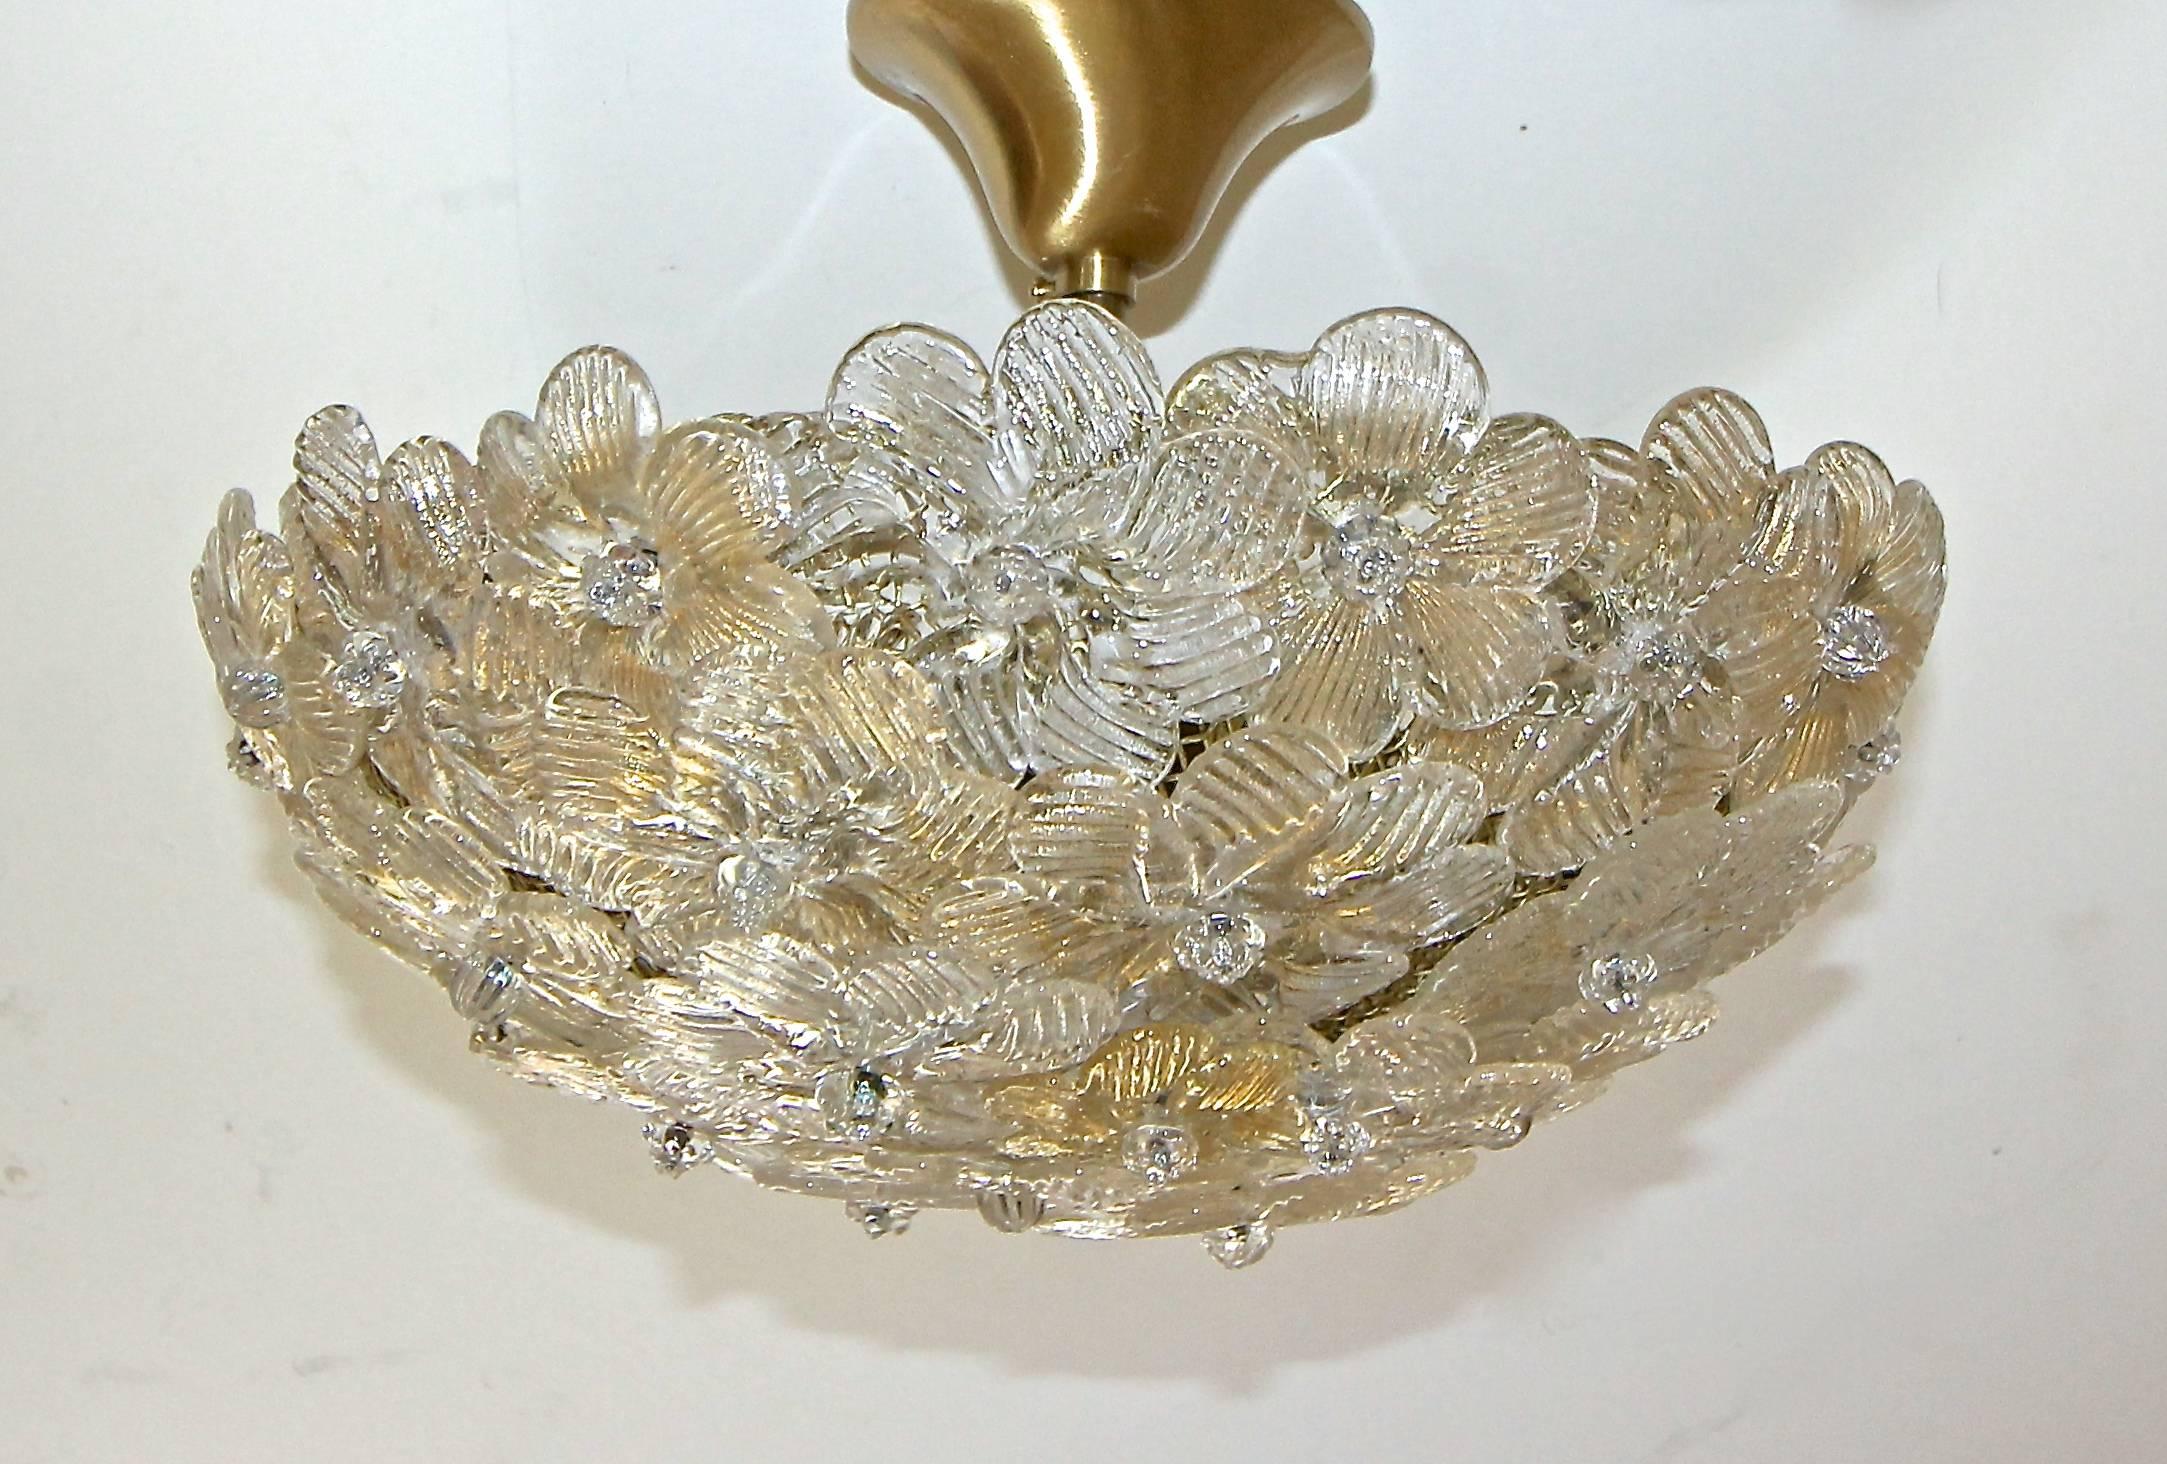 Murano Italian floral pendant semi flush mount ceiling light. Flowers are a mix of handblown flowers of clear glass with gold inclusions and clear glass. Perfect for smaller bathroom or entry way. Fixture uses 2-40 watt max candelabra base bulbs.